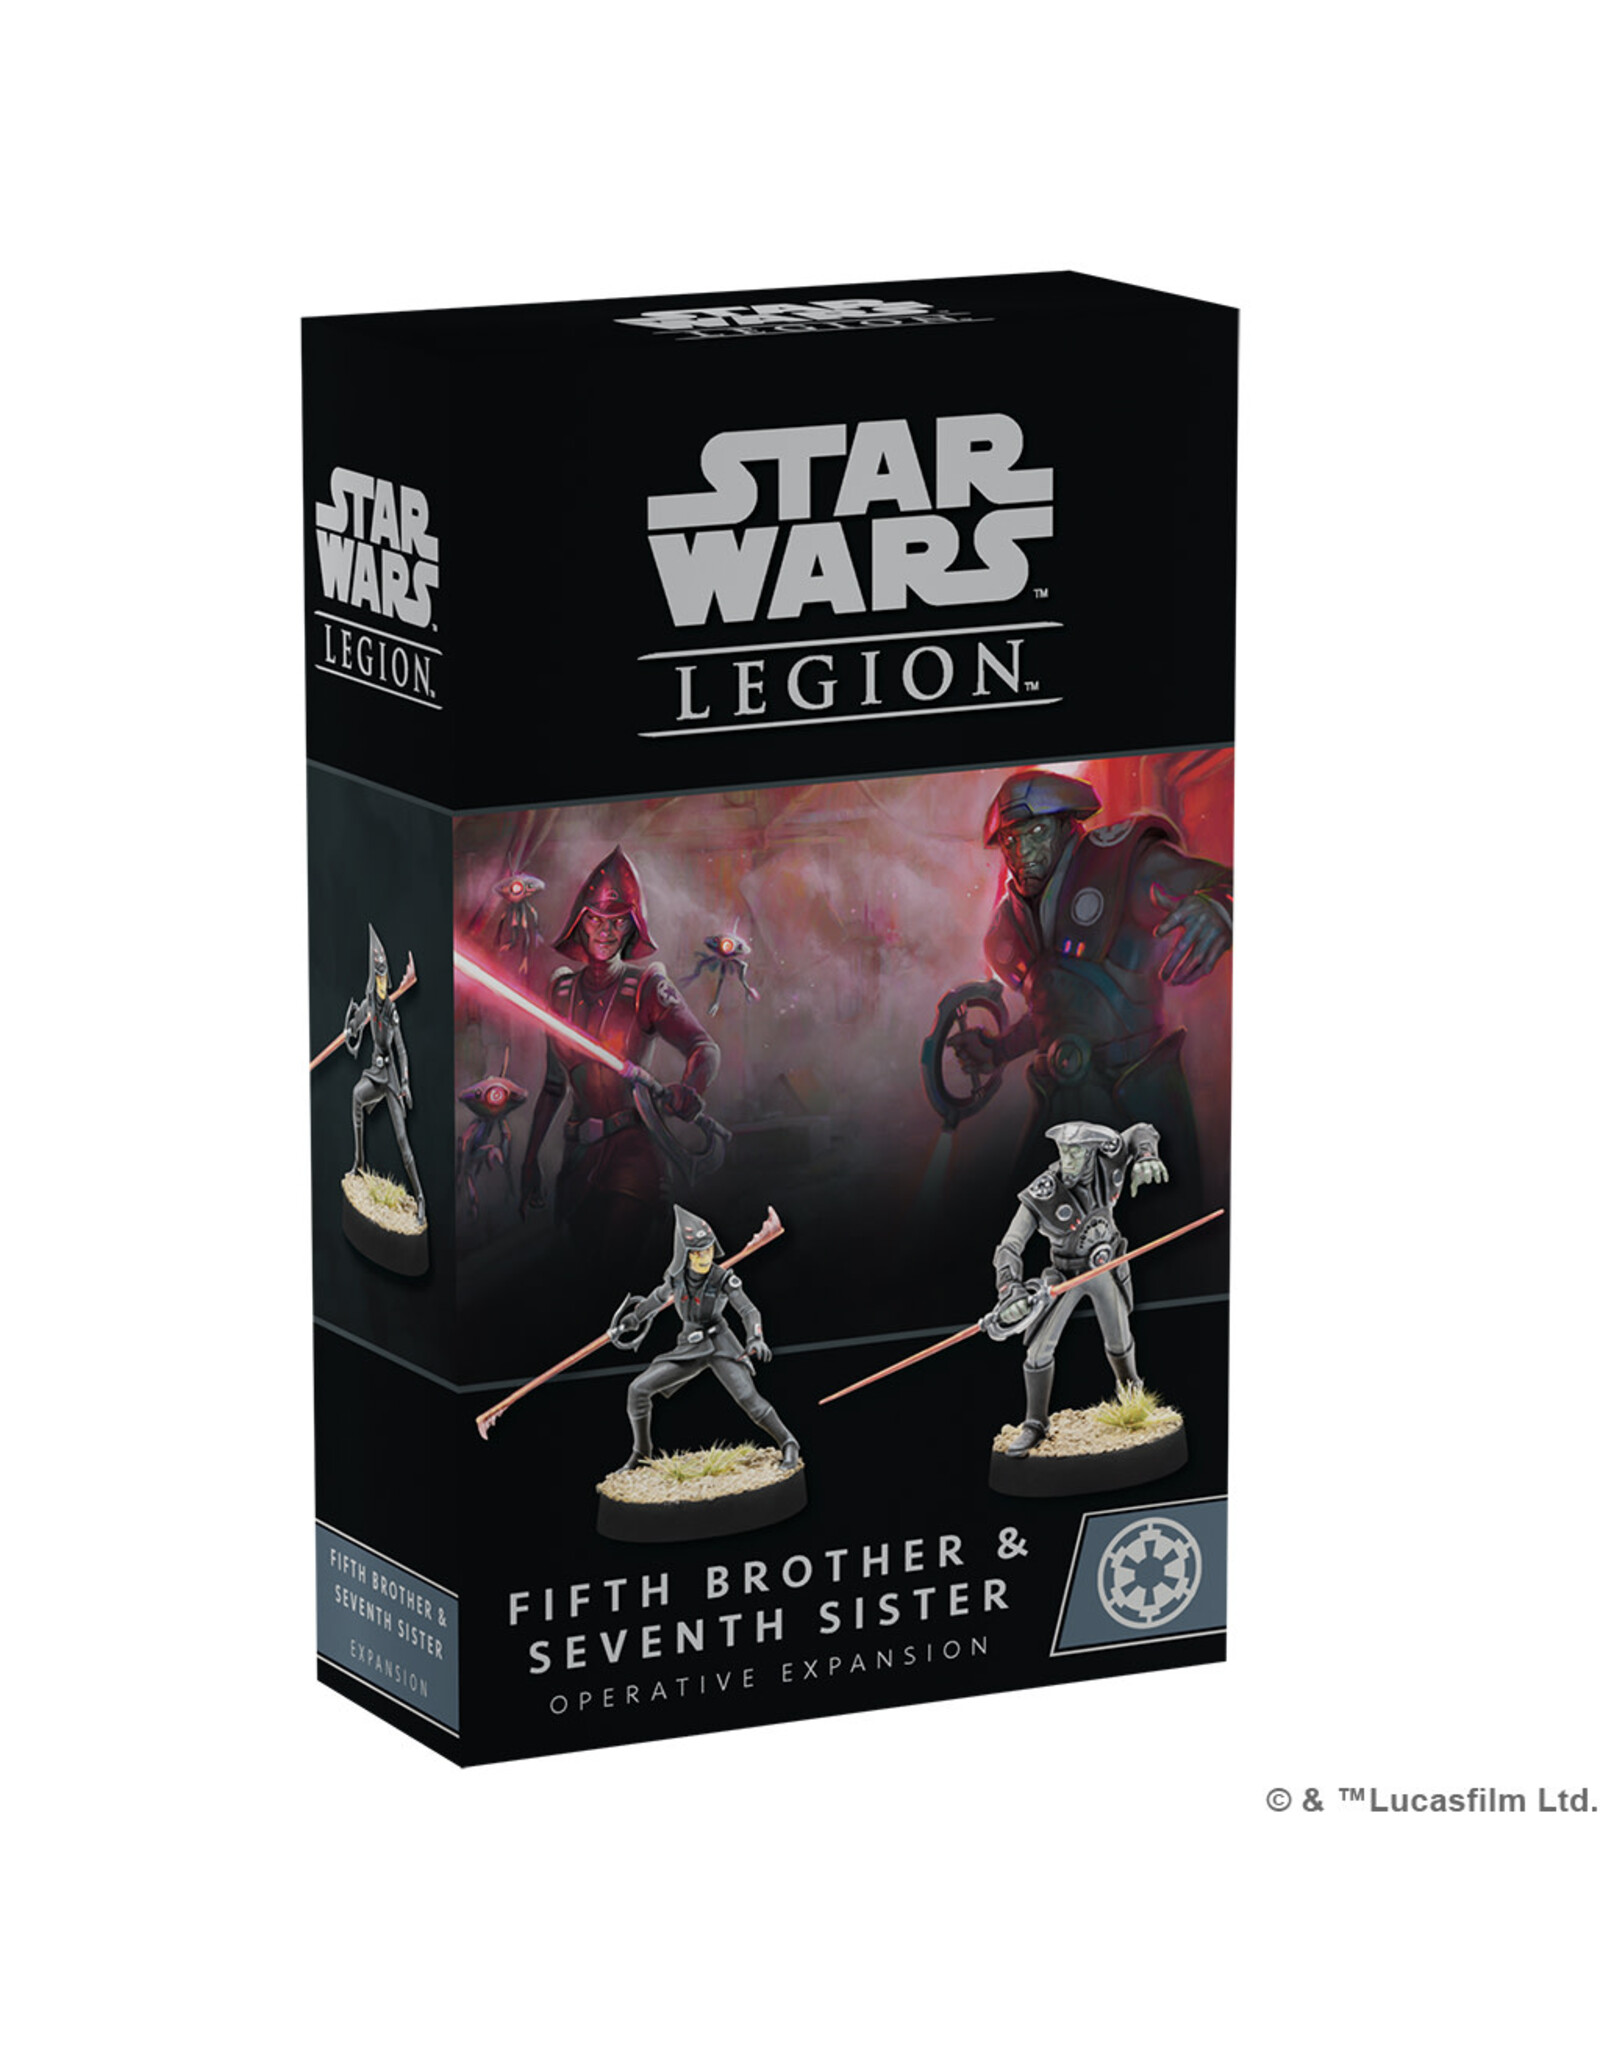 STAR WARS LEGION Star Wars Legion Fifth Brother and Seventh Sister Operative Expansion